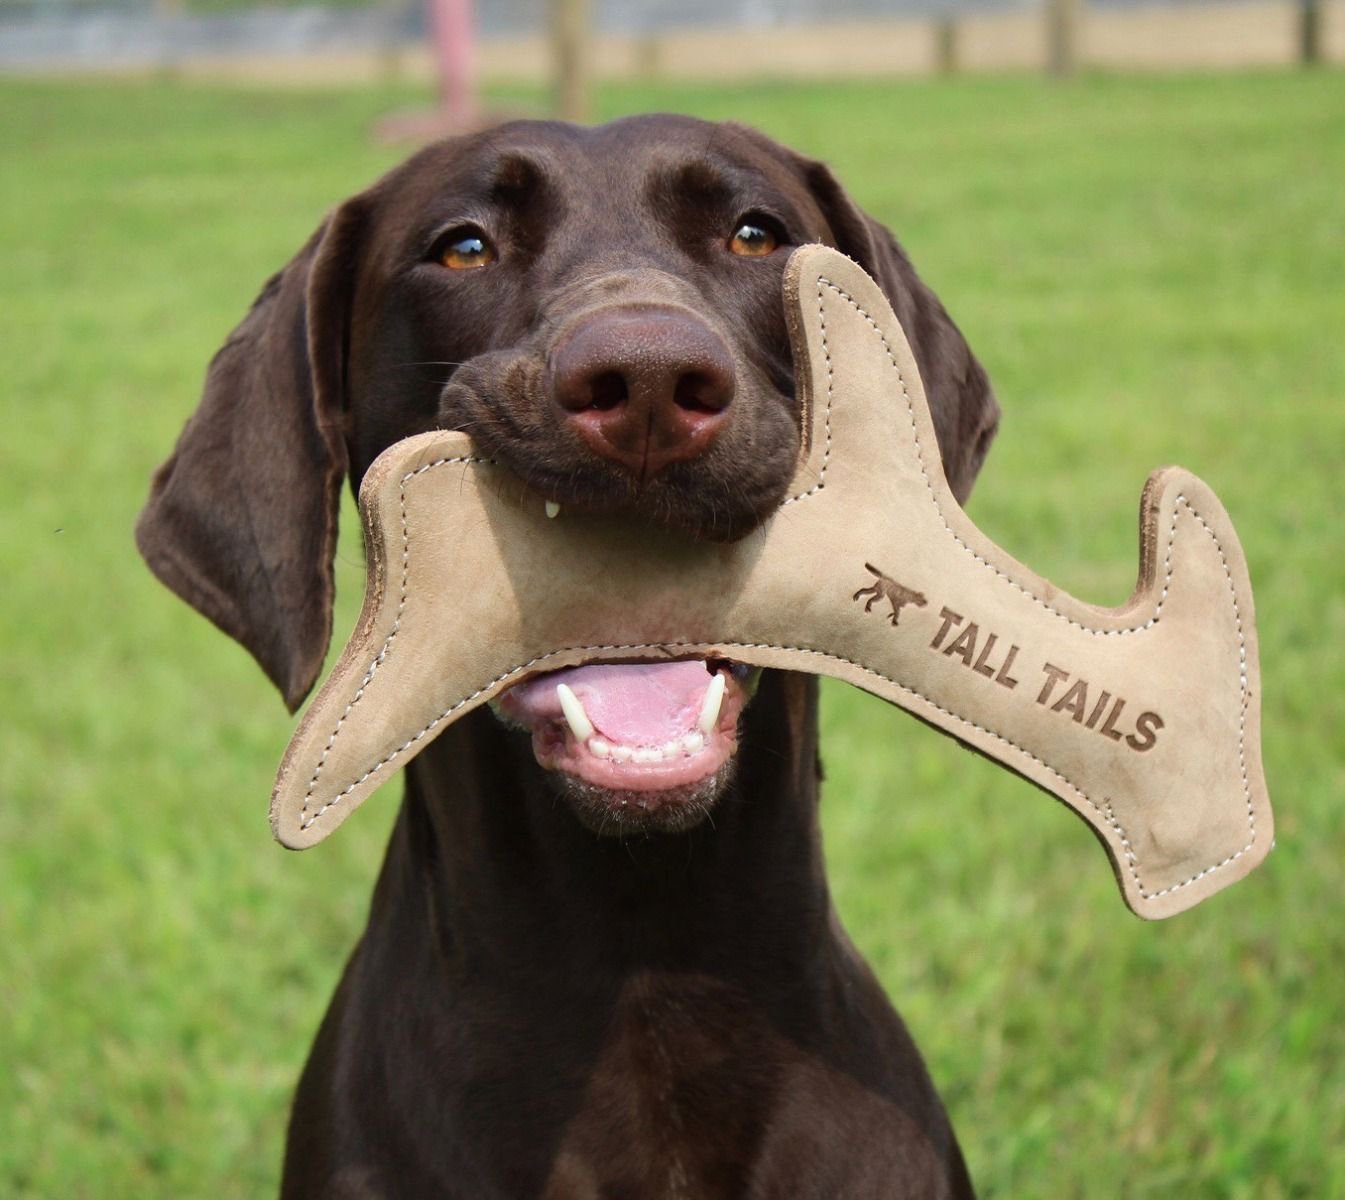 Tall Tails Leather Toys - Happy Hounds Pet Supply